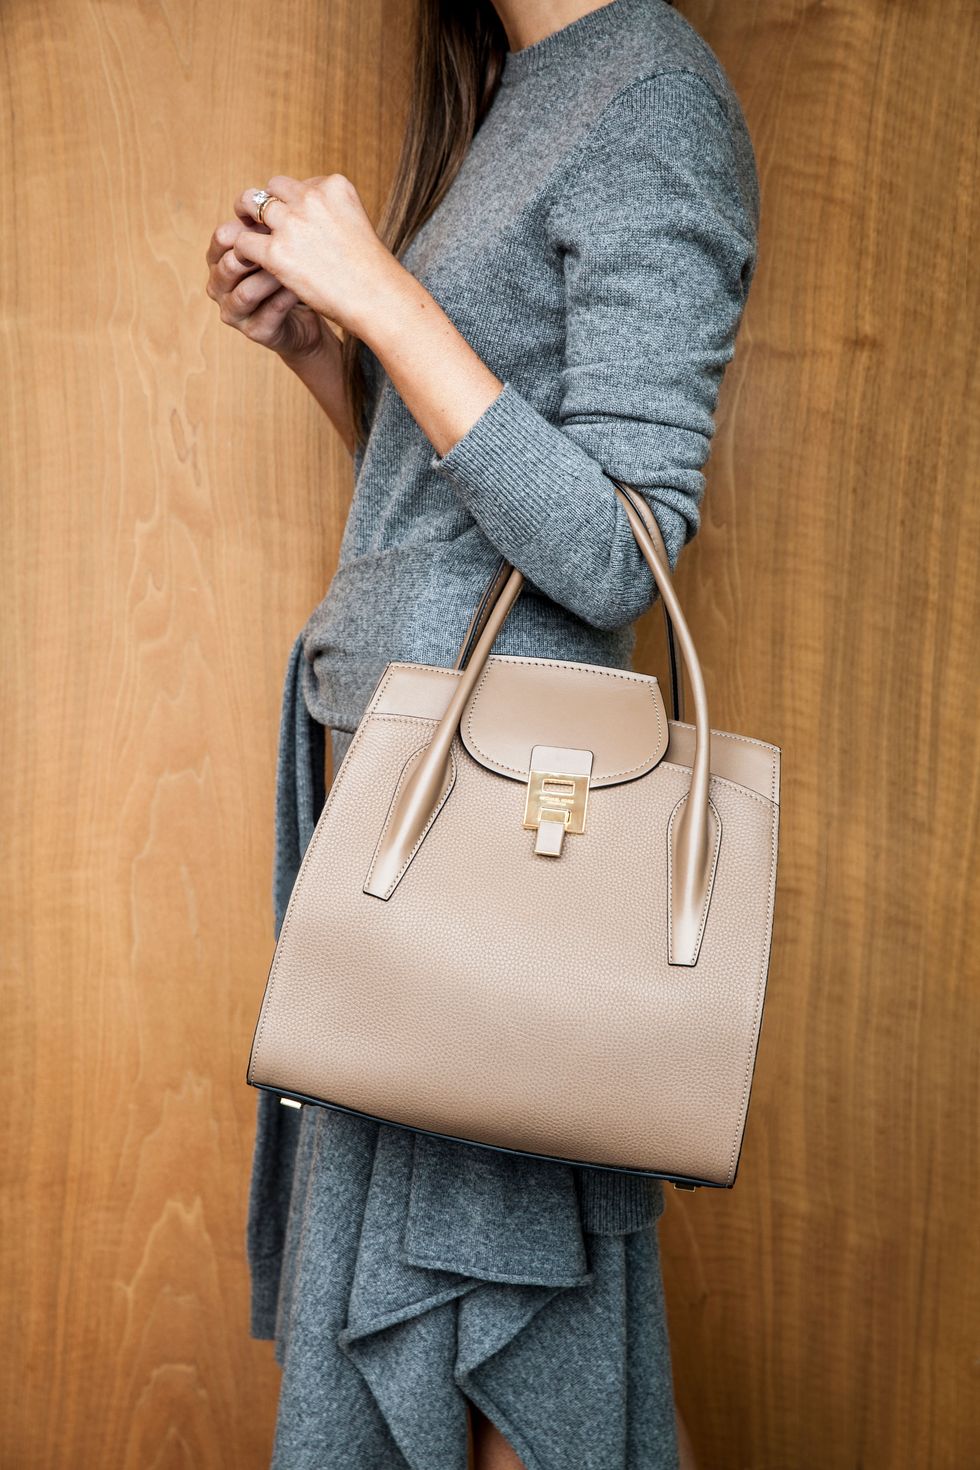 Elevate Your Style With Michael Kors Women's Handbags: Where